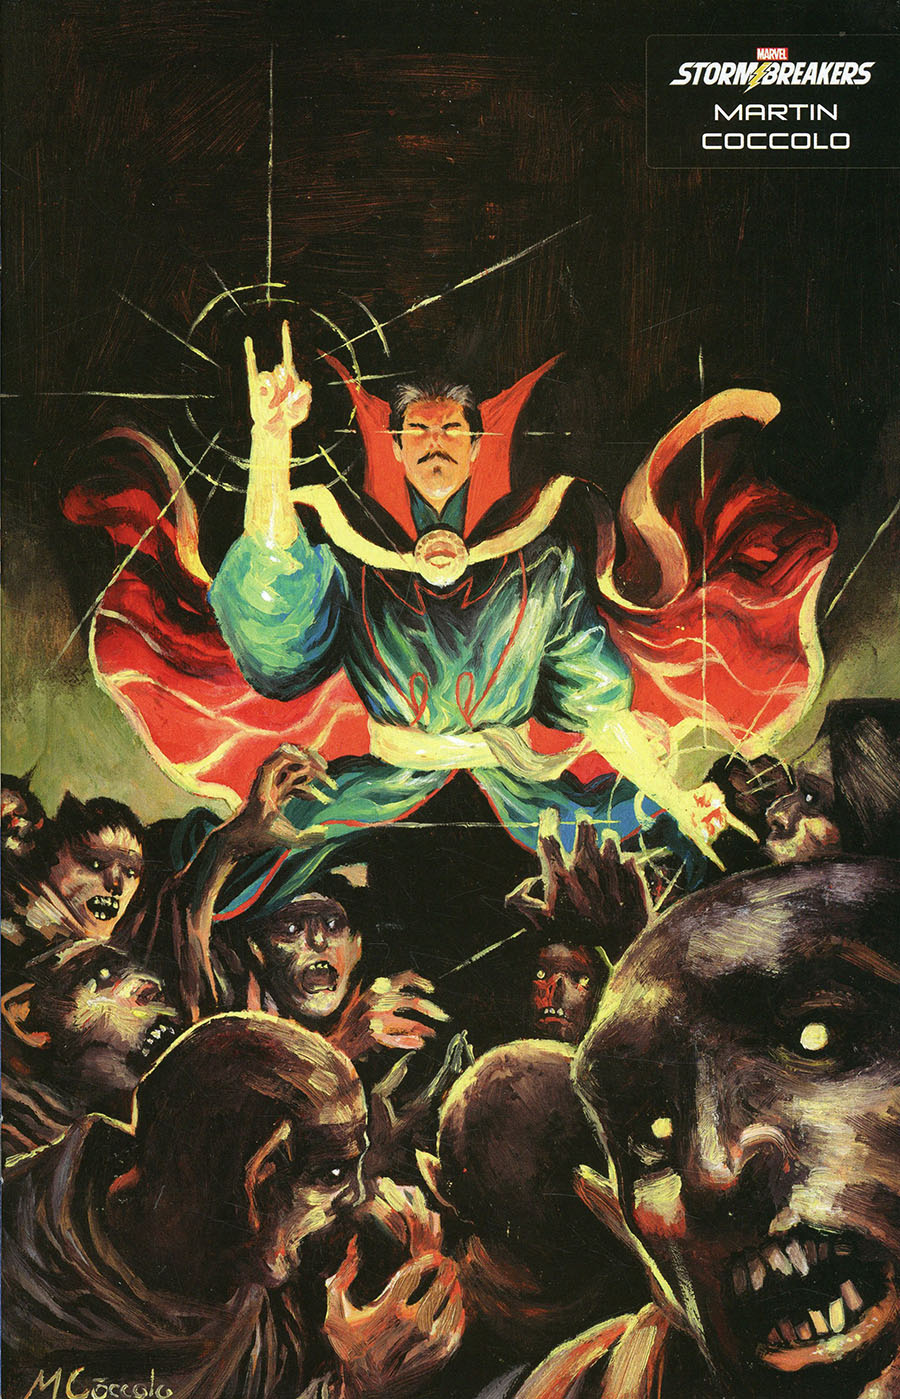 Doctor Strange Vol 6 #1 Cover D Variant Martin Coccolo Stormbreakers Cover